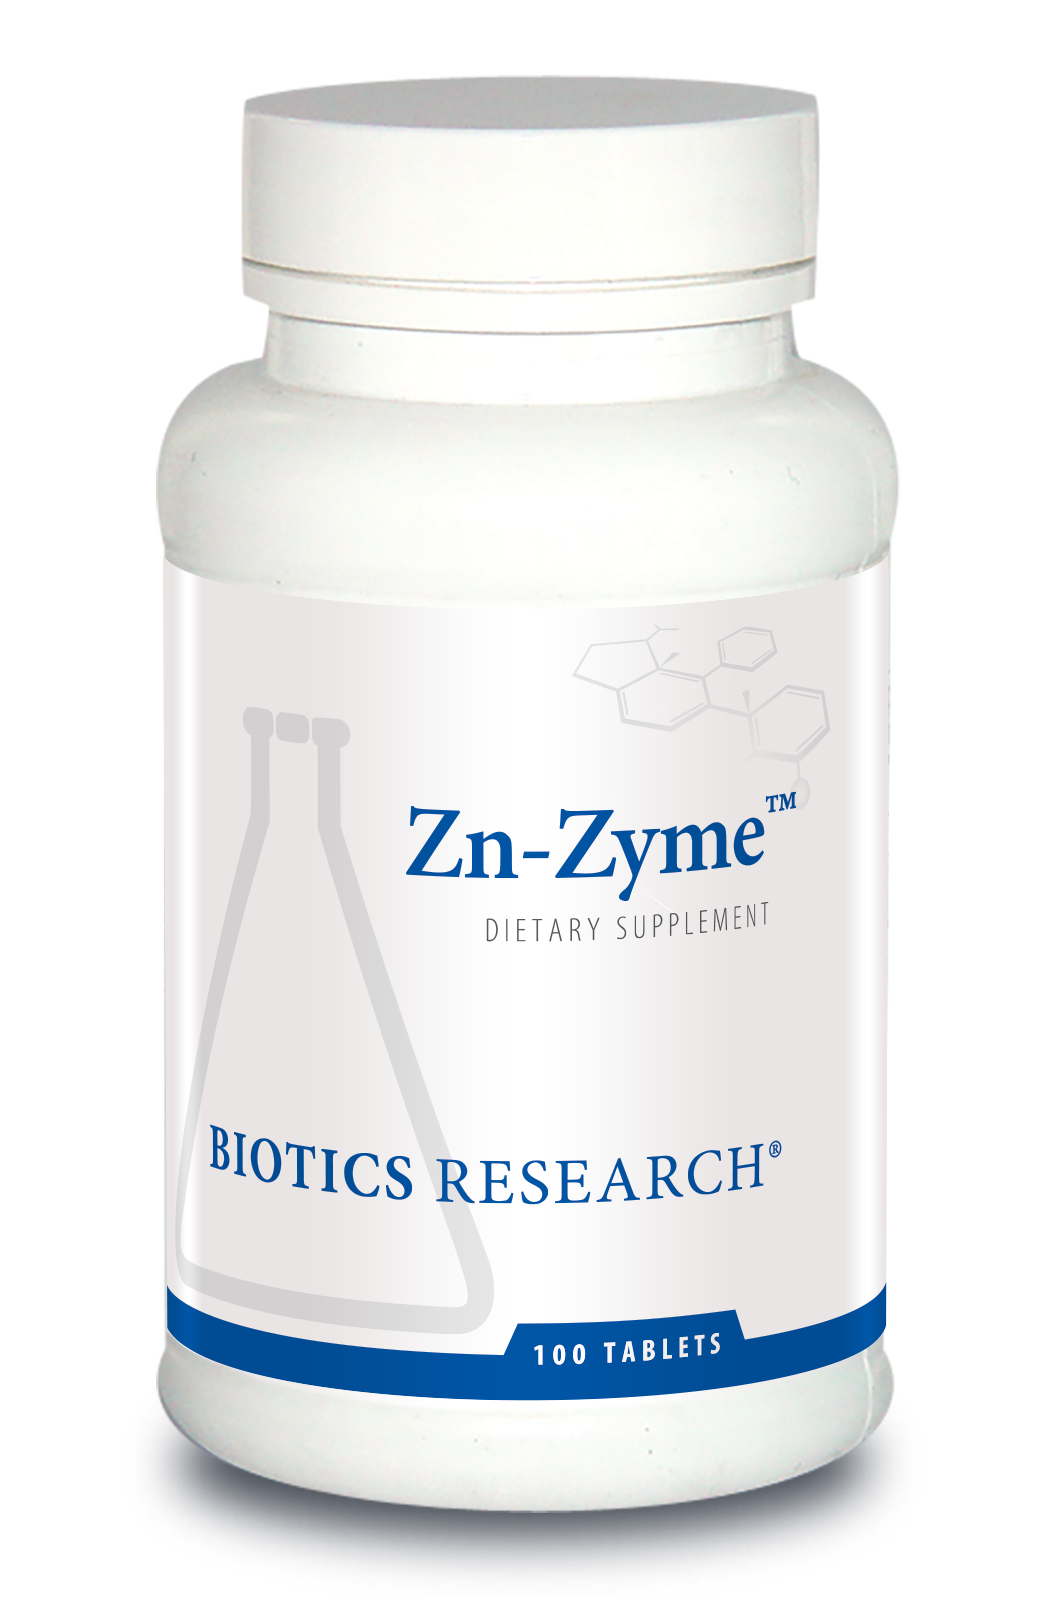 Is Zyns Bad For You? An Ingredient Analysis – Illuminate Labs